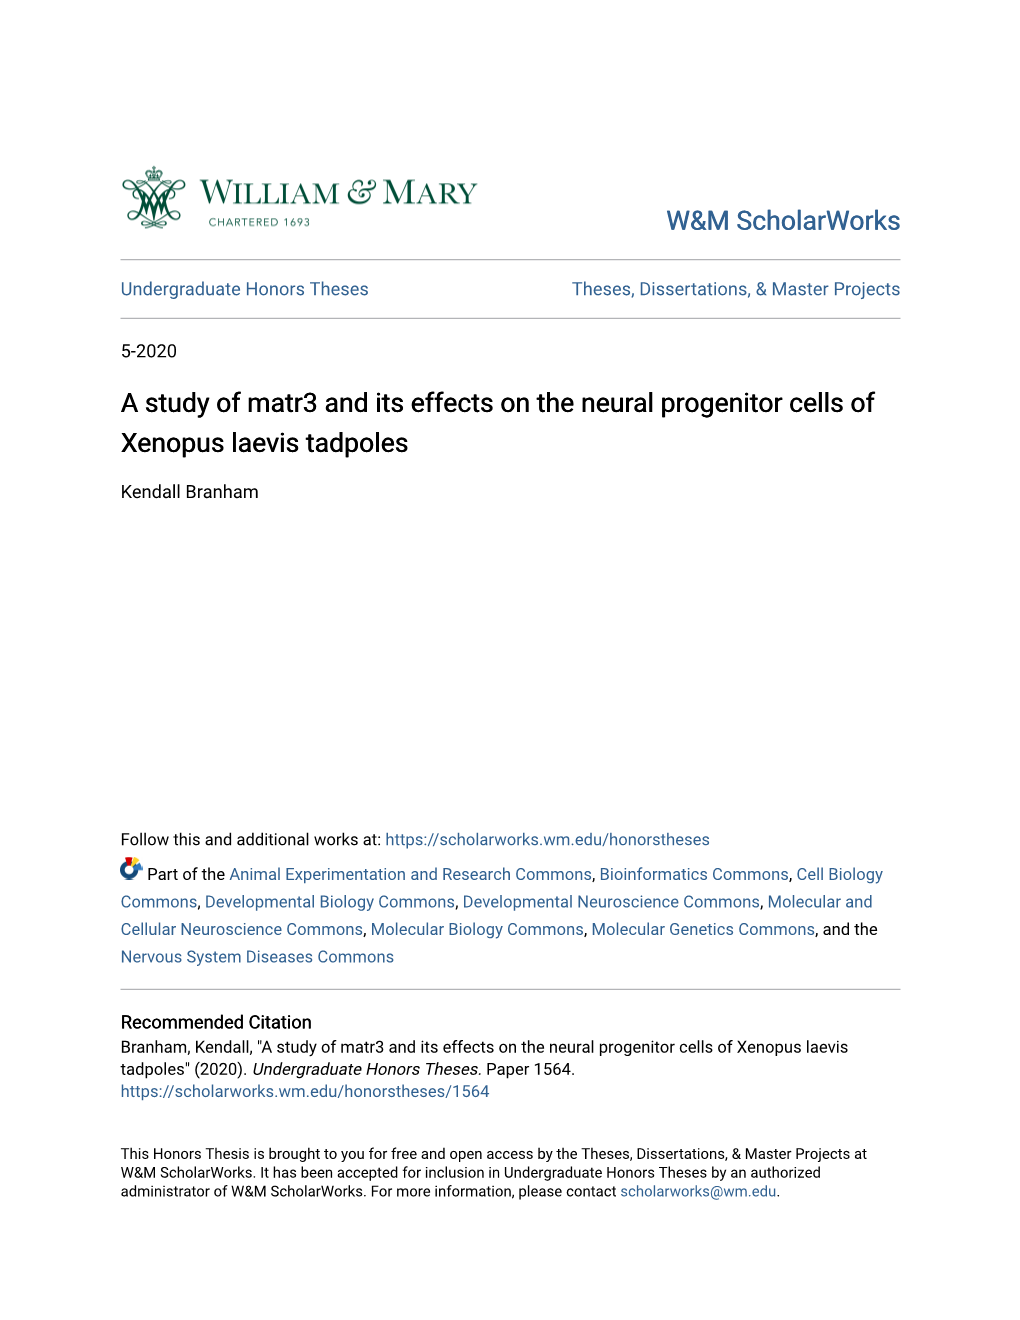 A Study of Matr3 and Its Effects on the Neural Progenitor Cells of Xenopus Laevis Tadpoles